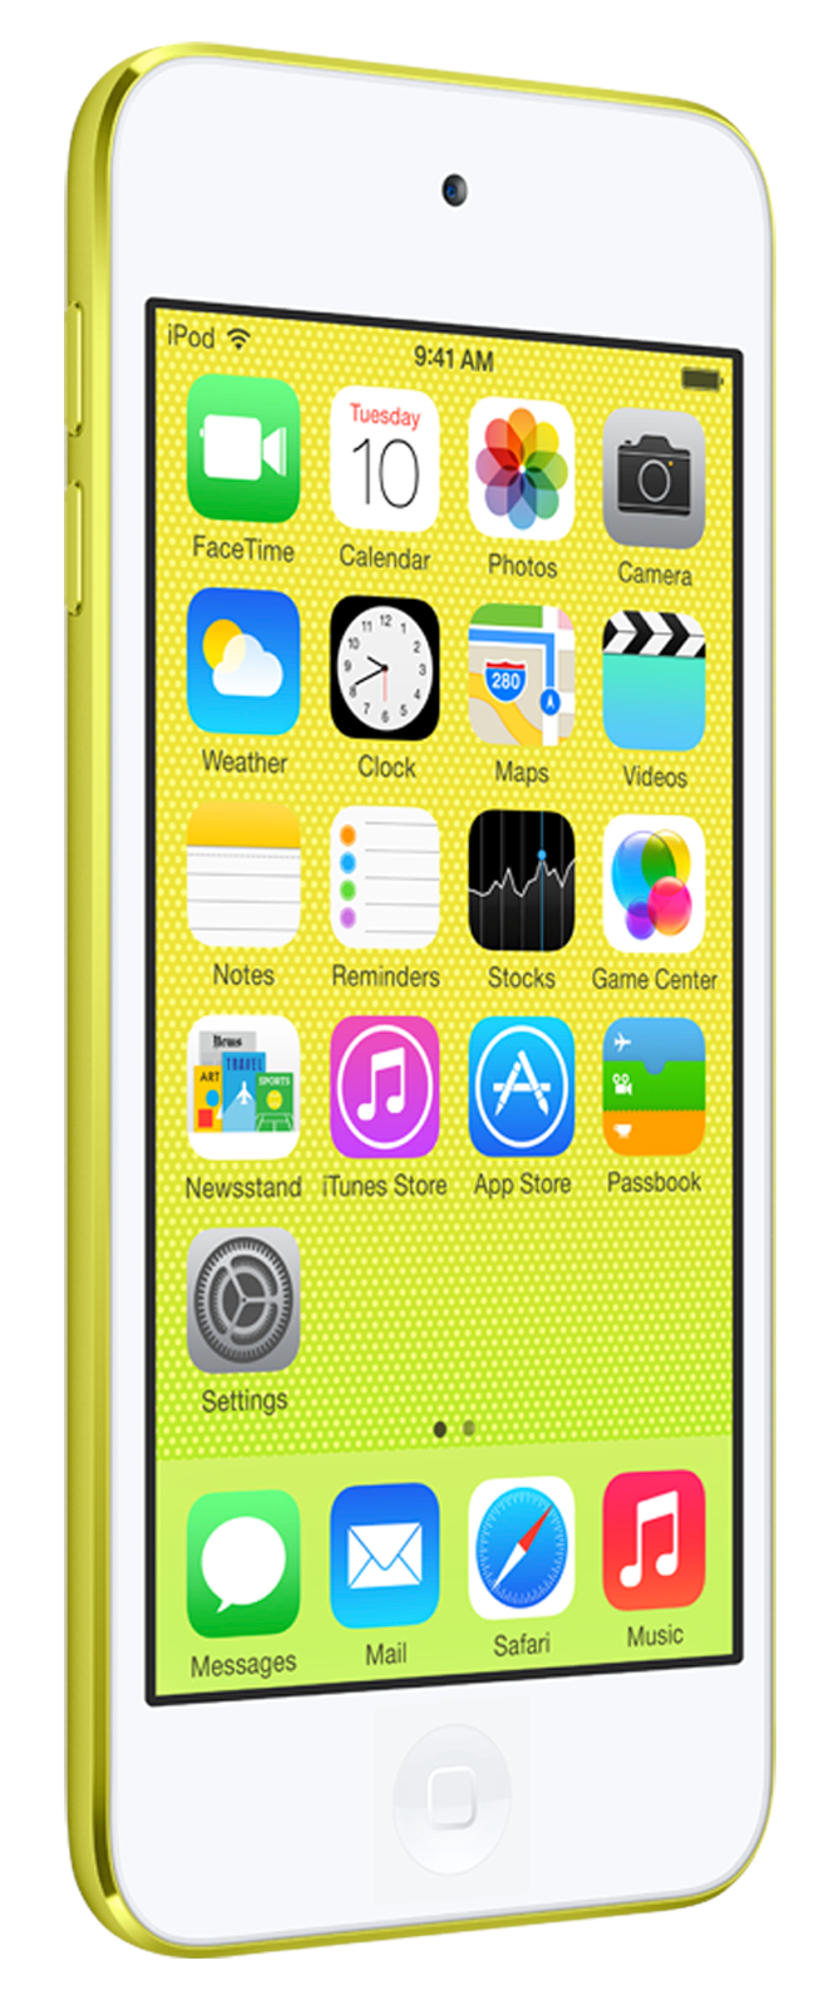 APPLE iPod touch MP4 Player, Gelb